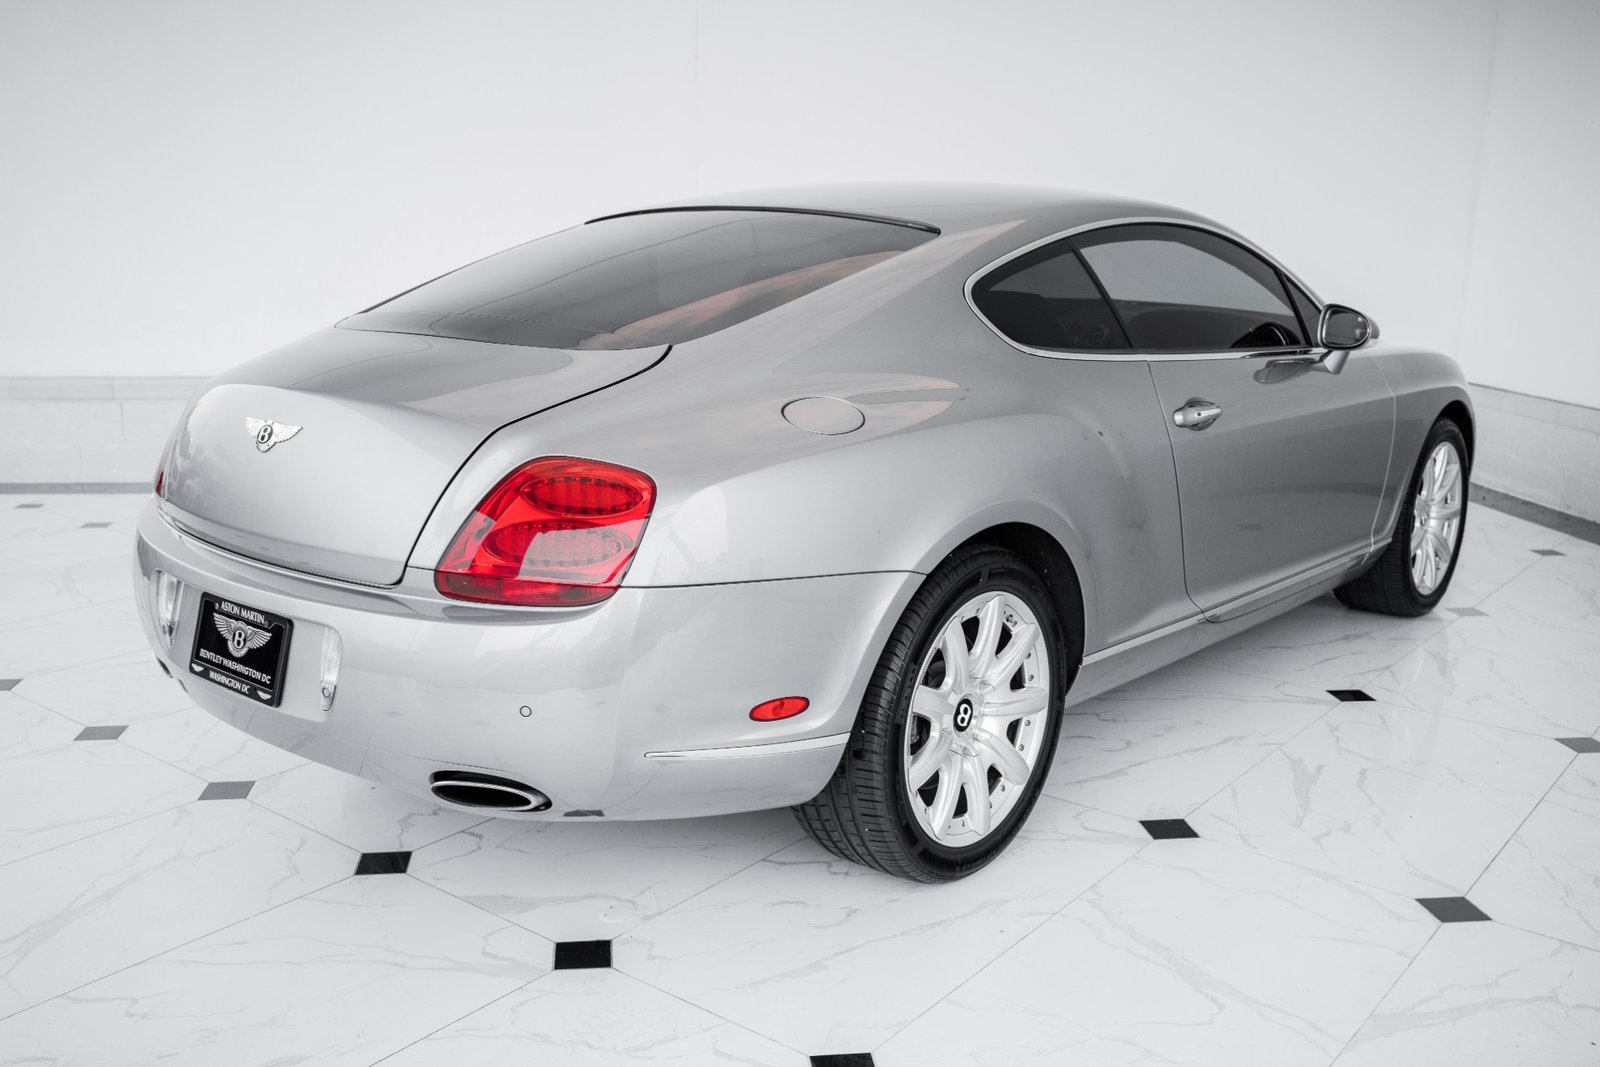 Used 2006 BENTLEY CONTINENTAL GT 2DR COUPE (3)